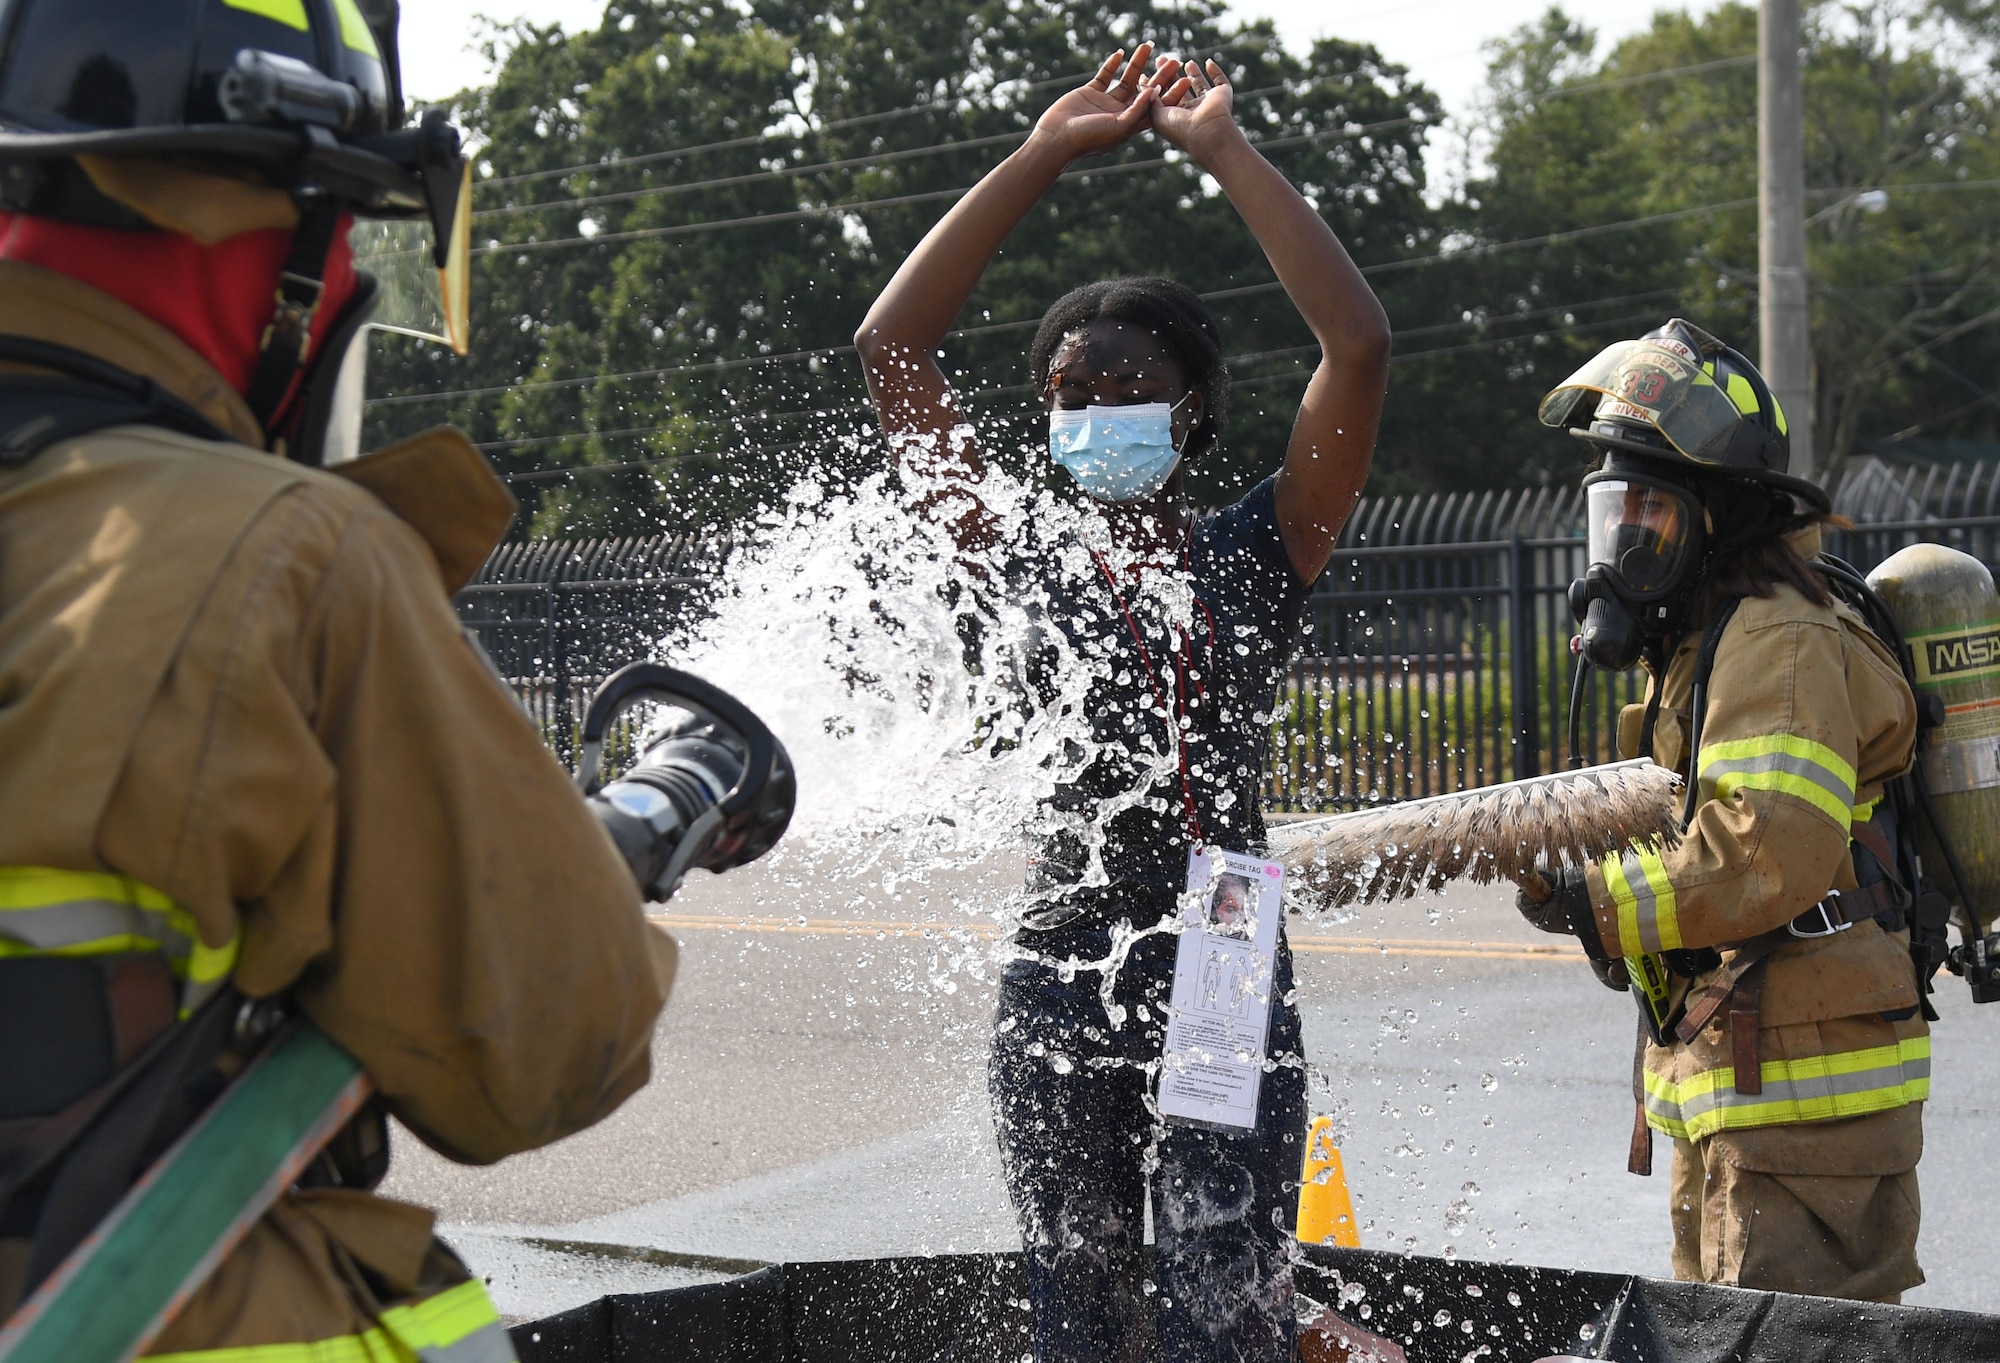 Members of the Keesler fire department decontaminates U.S. Air Force Airman Vera Amponsah, 335th Training Squadron student, as she portrays a victim during a Chemical, Biological, Radiological, Nuclear exercise at Keesler Air Force Base, Mississippi, Aug. 6, 2021. The Ready Eagle exercise tested the base's ability to respond to and recover from a mass casualty event. (U.S. Air Force photo by Kemberly Groue)